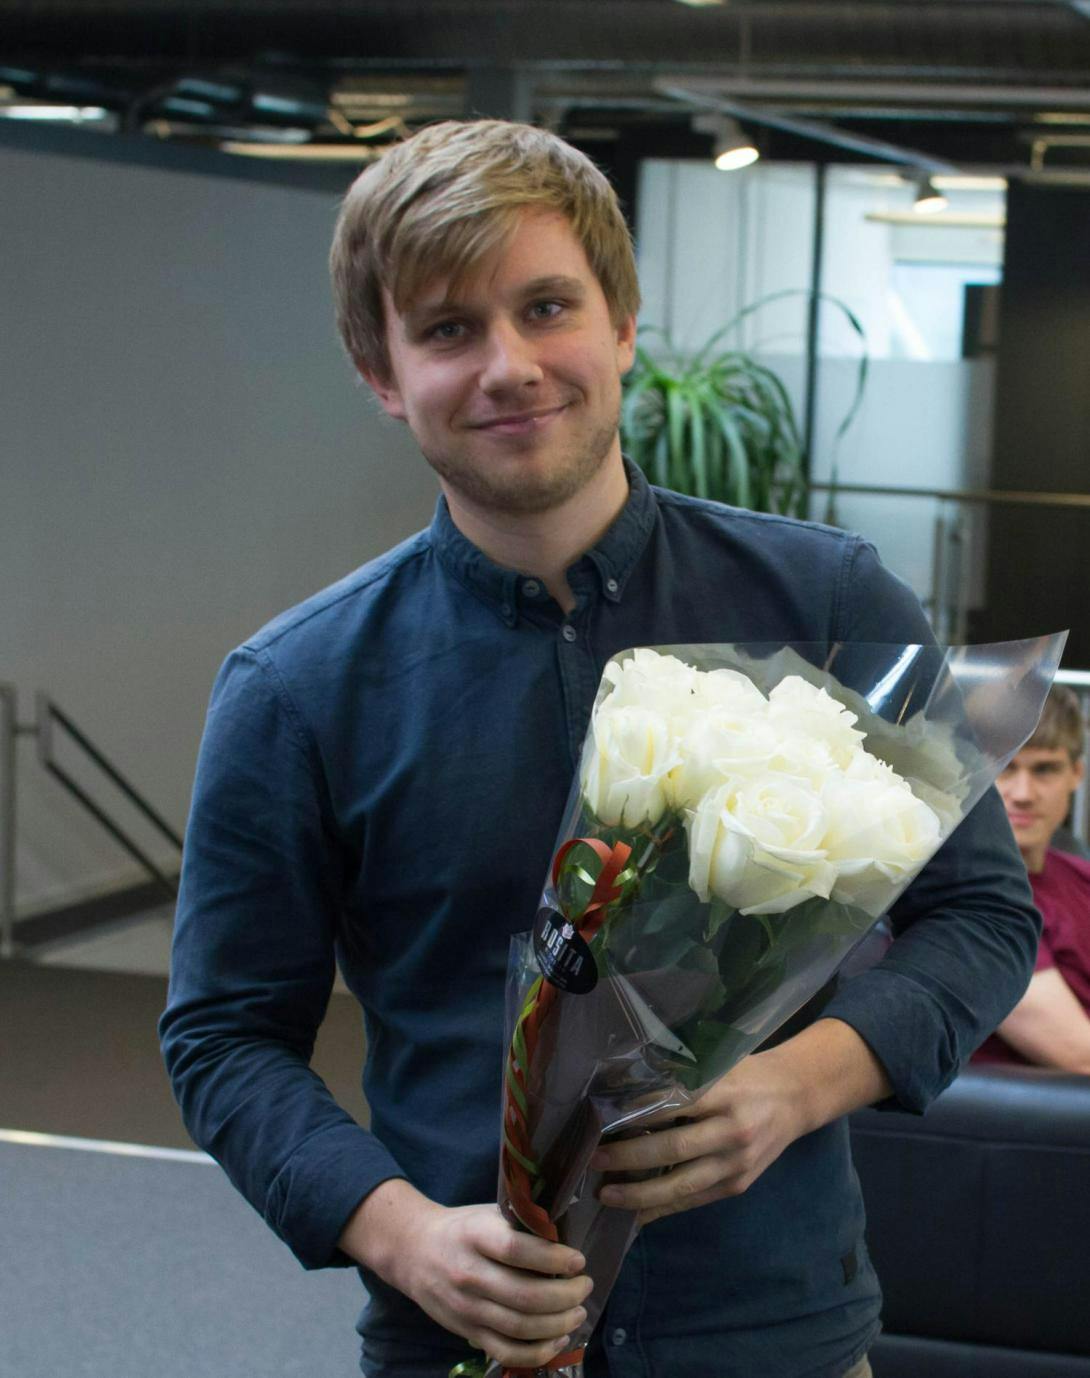 Simula congratulates Aslak Bergersen after he recieves the best thesis award from the Norwegian Computing Centre. (Photo: Simula)